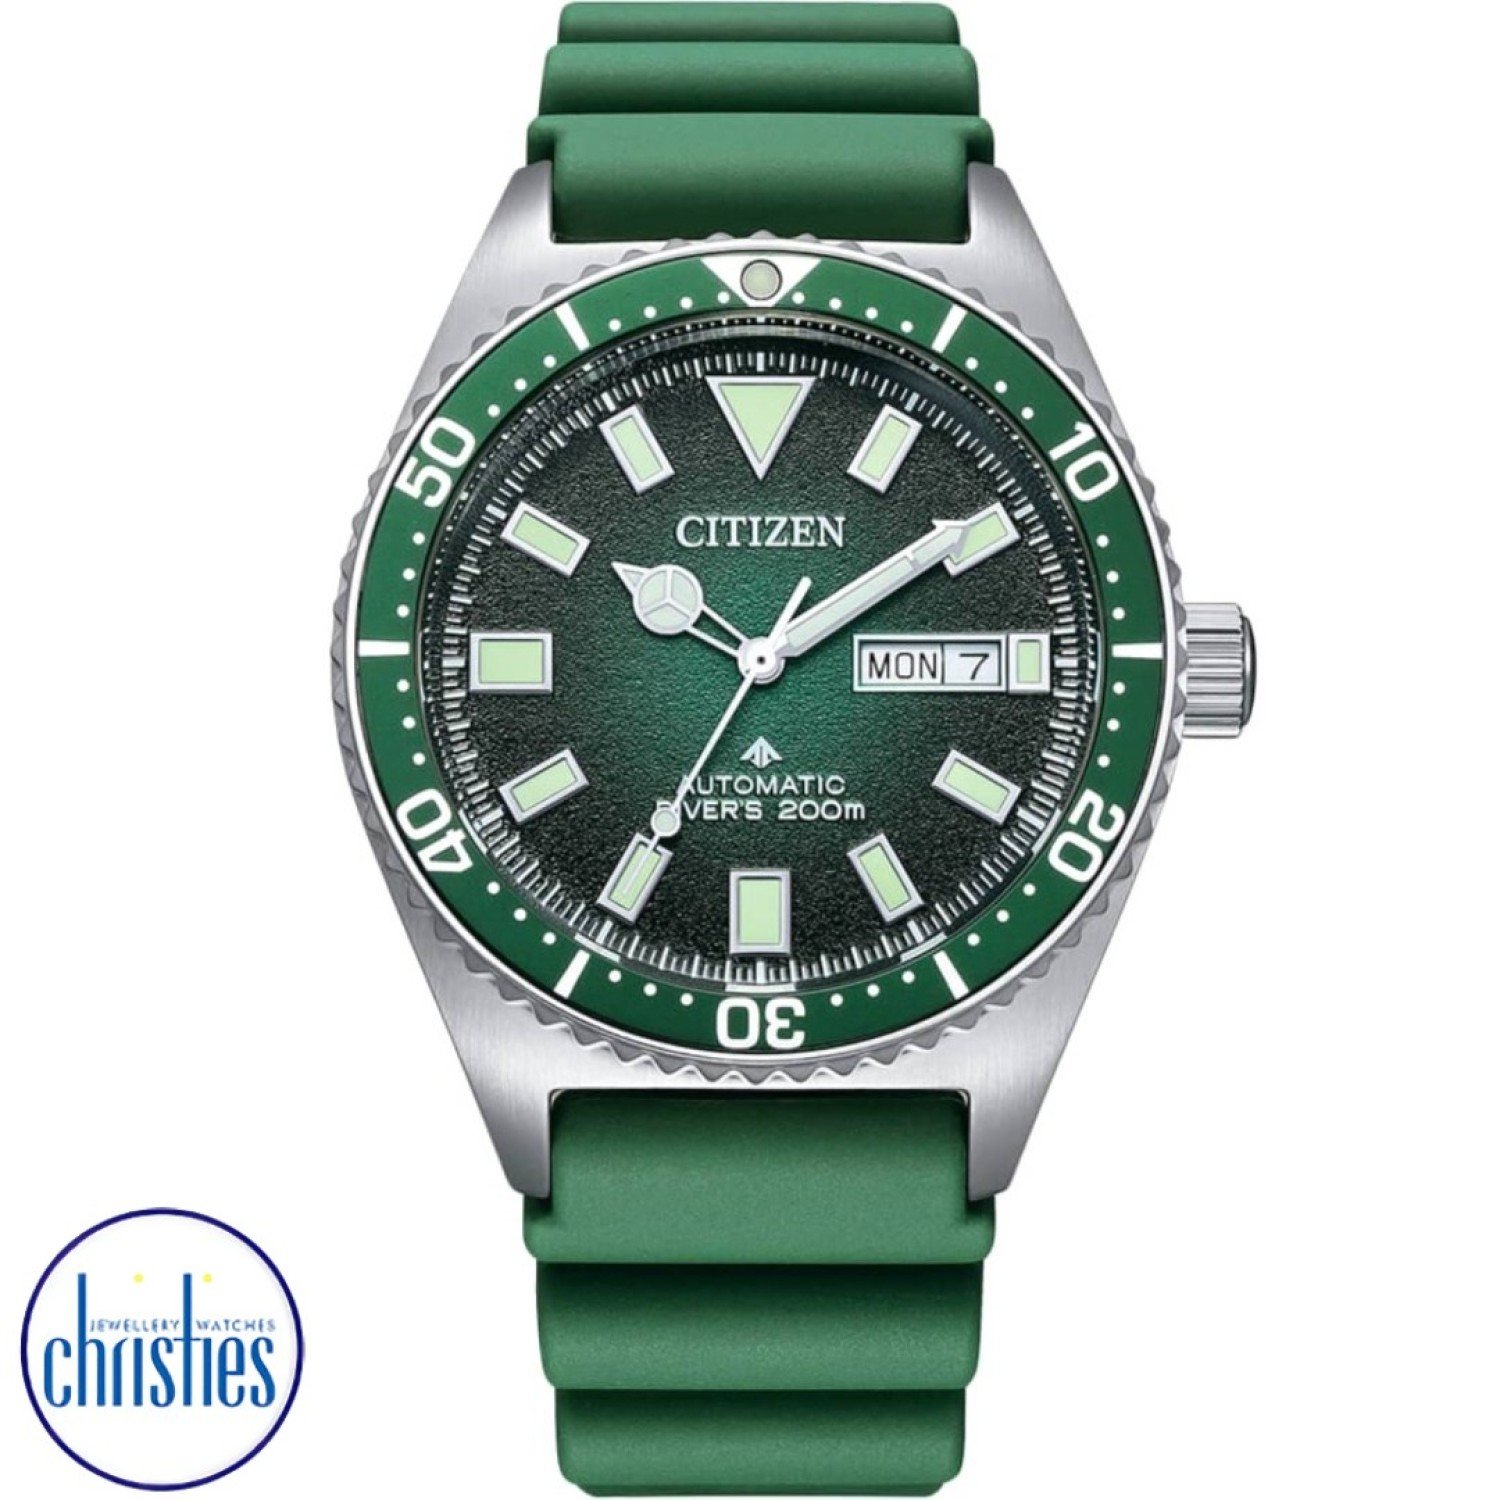 NY0121-09X CITIZEN Promaster Automatic NY0121-09X  Citizen Watches Auckland- Christies Jewellery Online and Auckland - Free Delivery - Afterpay, Laybuy and Zip  the easy way to pay.